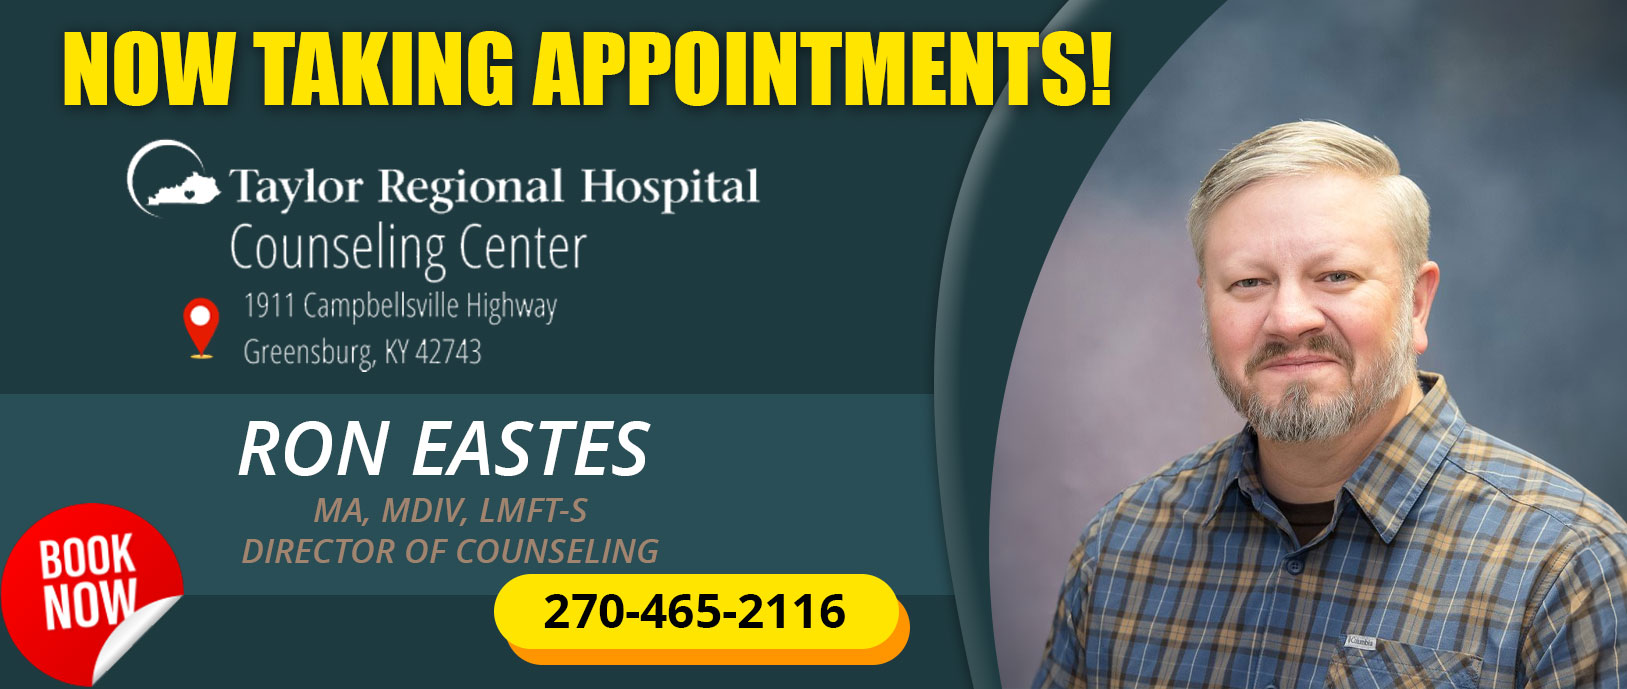 Now Taking Appointments

Taylor Regional Hospital Counseling Center
1911 Campbellsville Highway
Greensburg, KY, 42743

Ron Eastes
MA, MDIV, LMFT-S
Director of Counseling 

270-465-2116

Book Now by clicking here